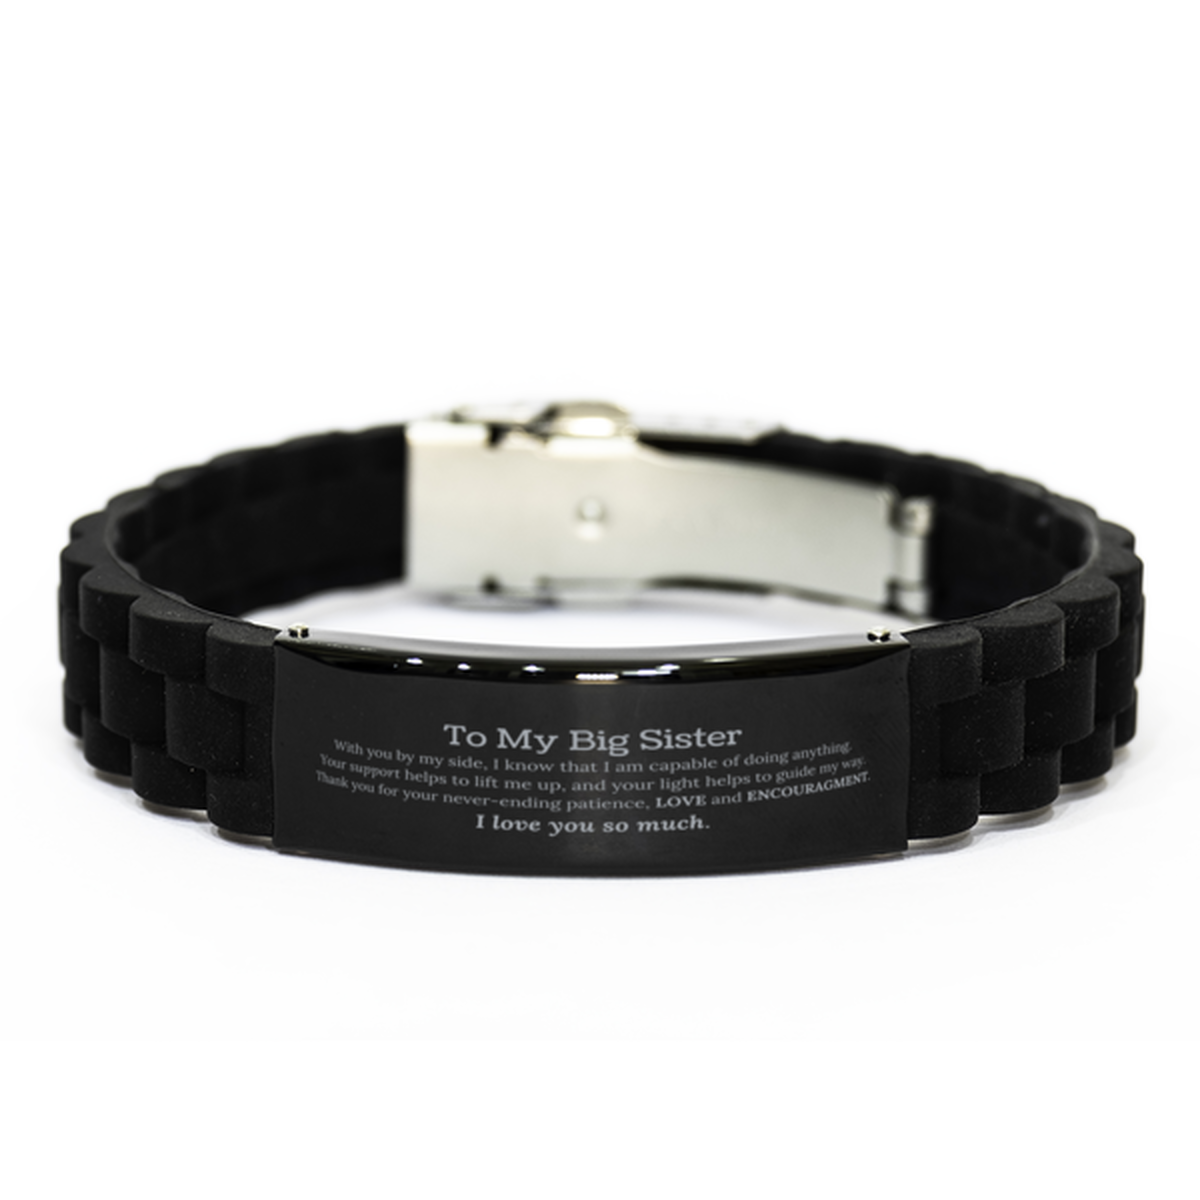 Appreciation Big Sister Black Glidelock Clasp Bracelet Gifts, To My Big Sister Birthday Christmas Wedding Keepsake Gifts for Big Sister With you by my side, I know that I am capable of doing anything. I love you so much